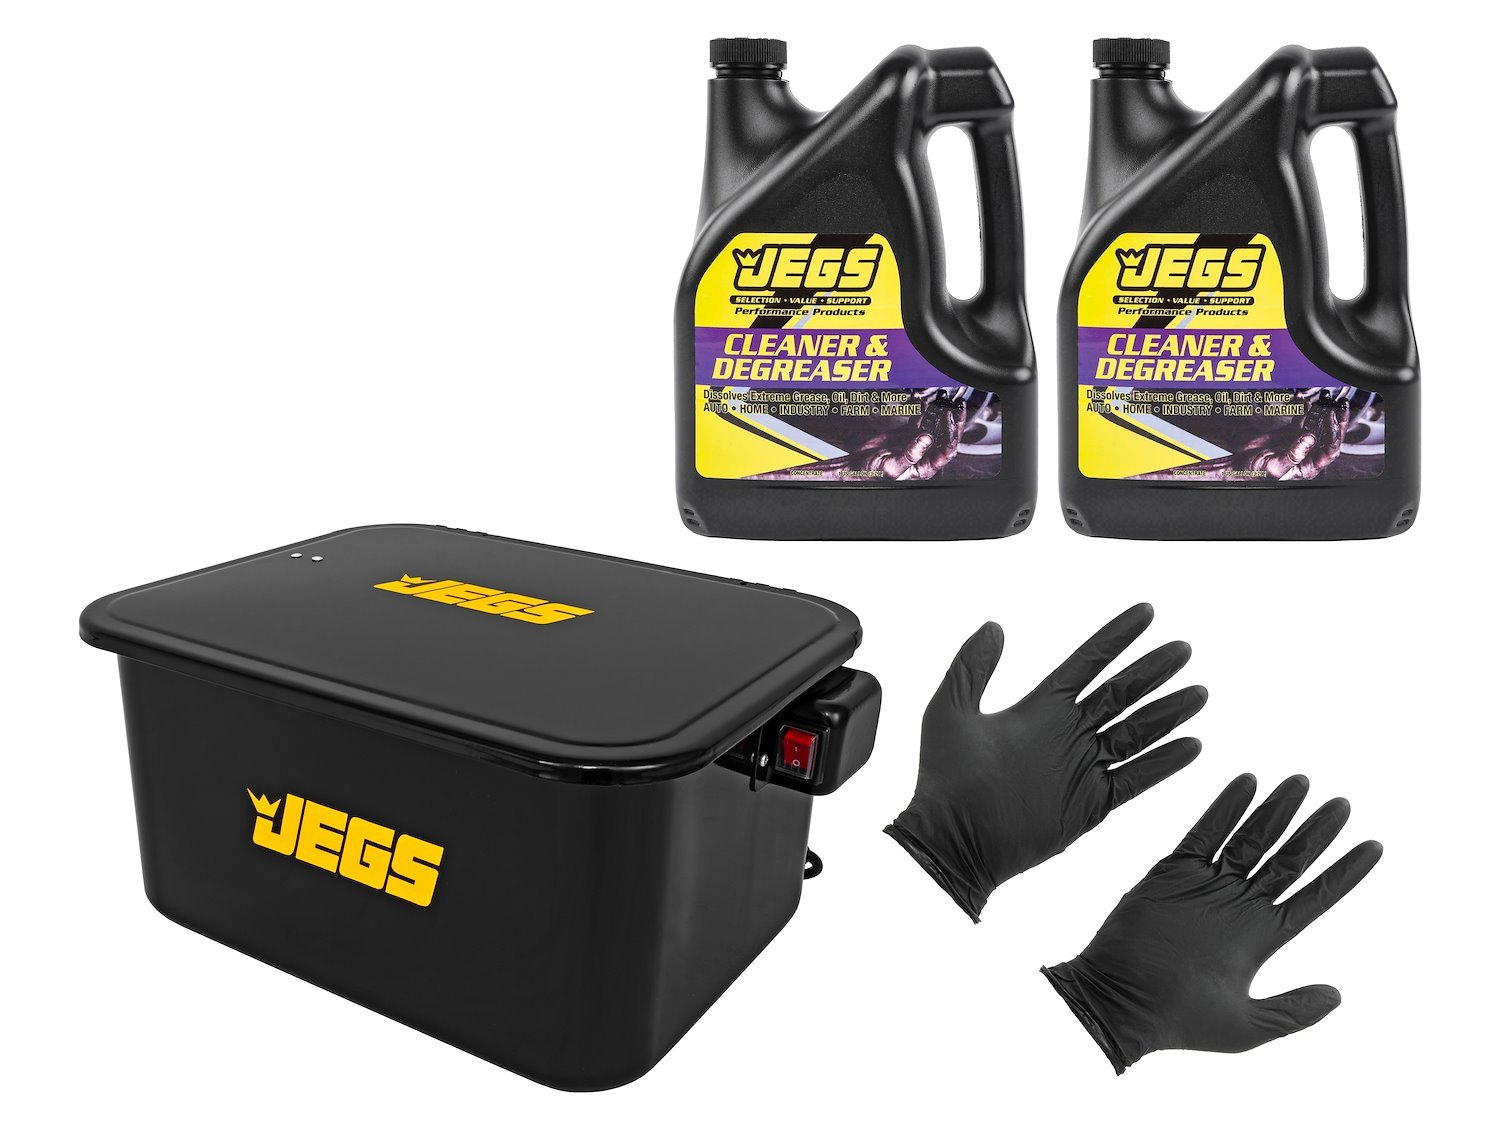 Portable Parts Washer Kit with 2 One Gallon Bottles of Cleaner/Degreaser & Large Gloves [5-Gallon Tank]